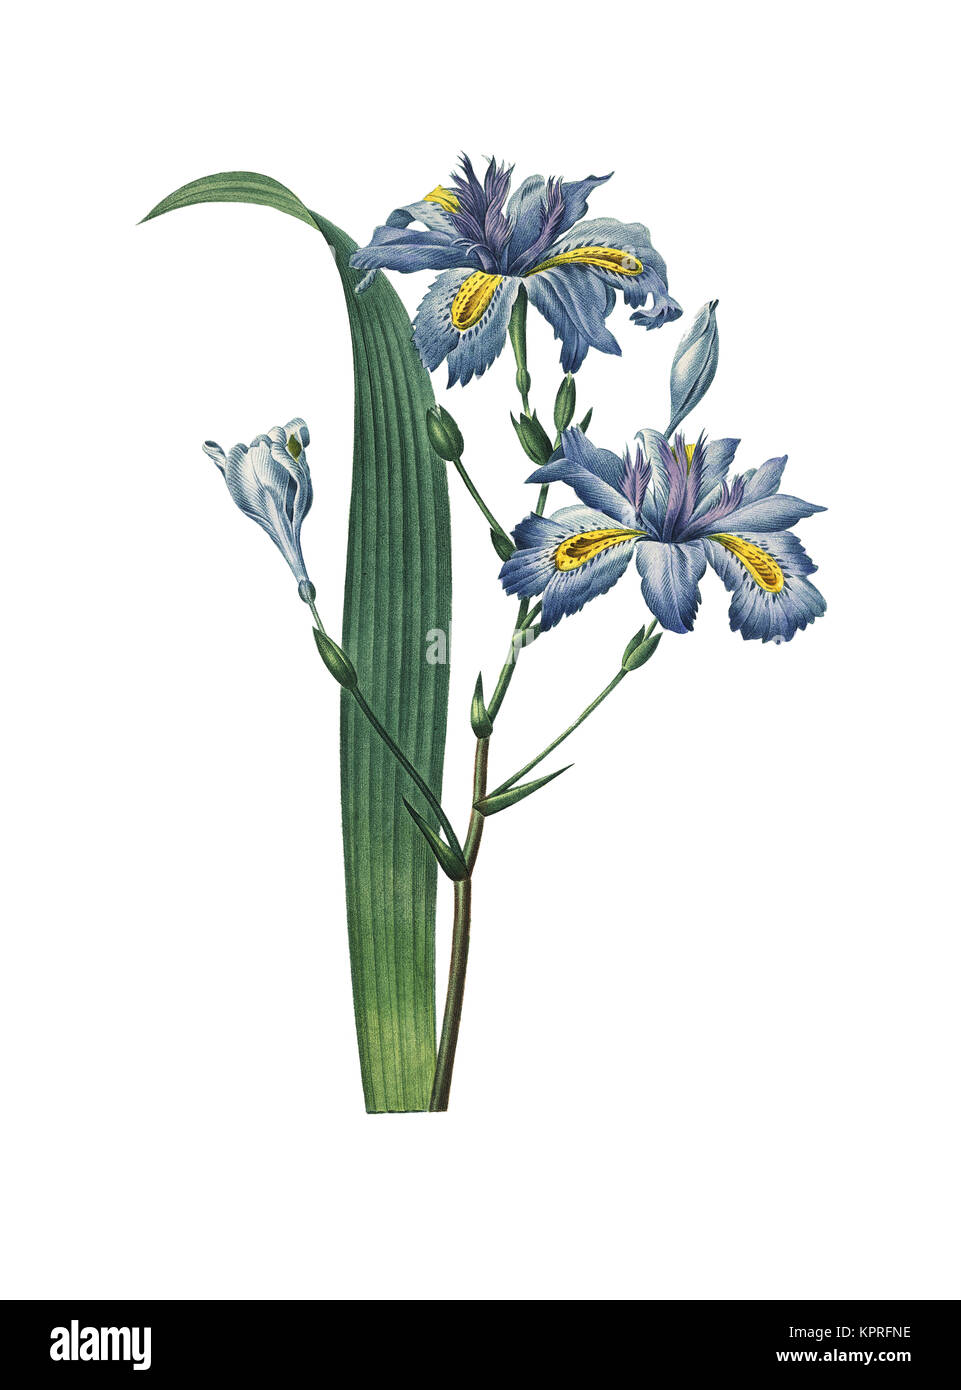 19th-century illustration of a Iris japonica or Japanese iris. Engraving by Pierre-Joseph Redoute. Published in Paris (1827). Stock Photo